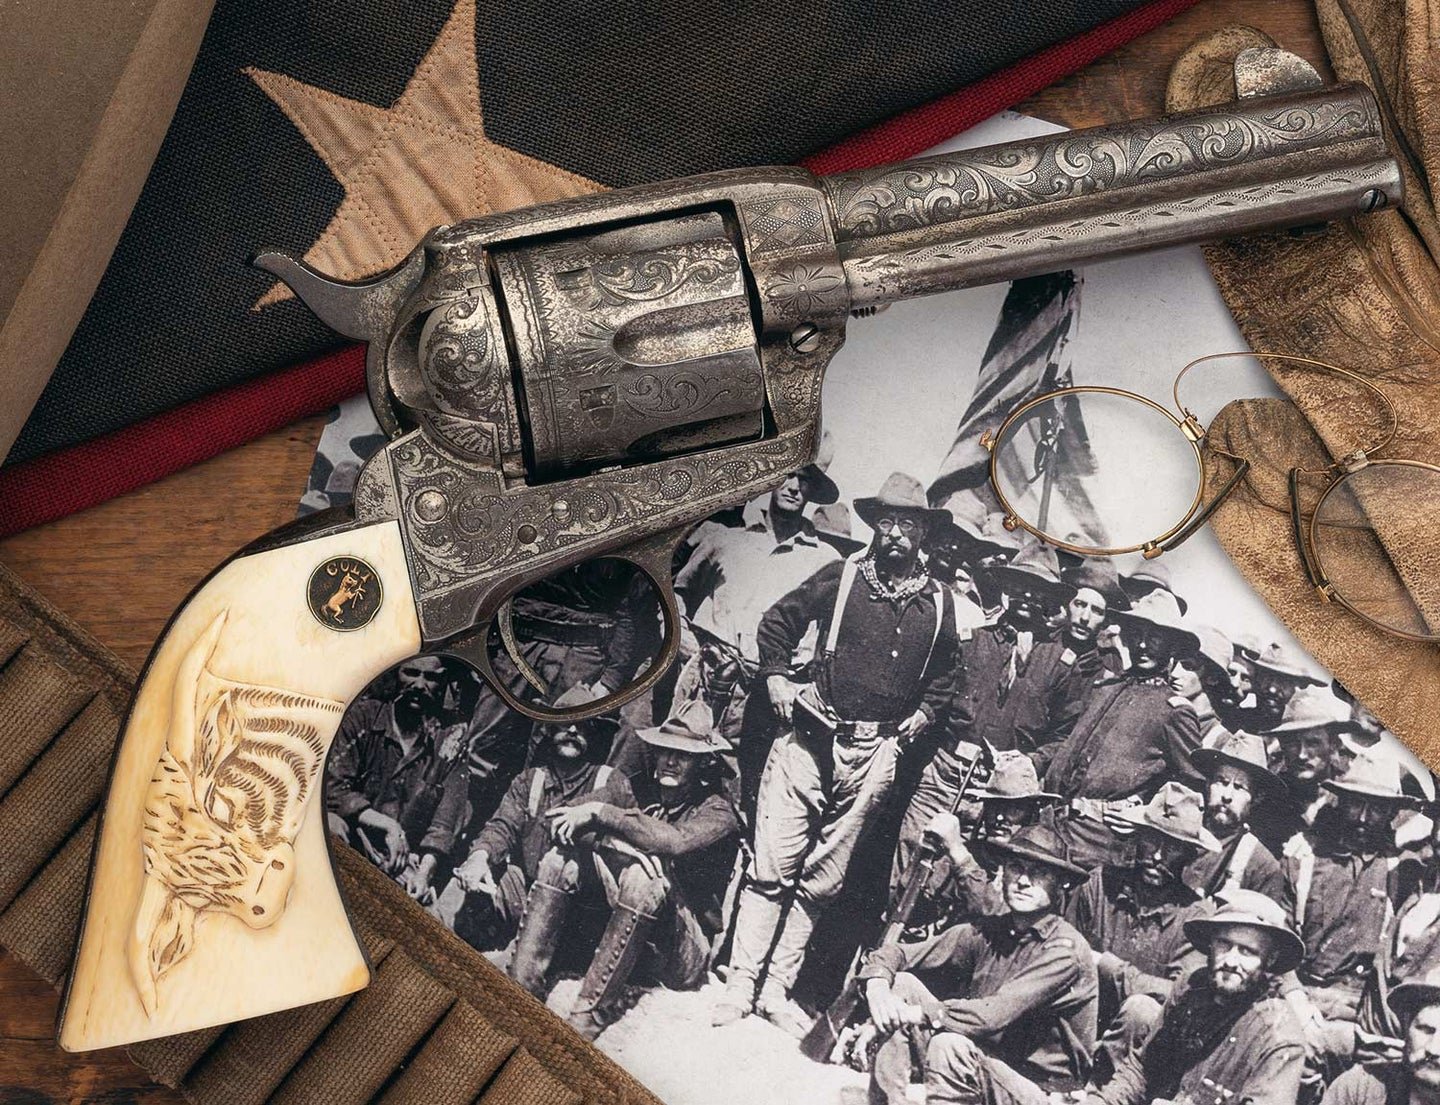 Teddy Roosevelt's Colt Single Action Army revolver just sold for a crazy amount